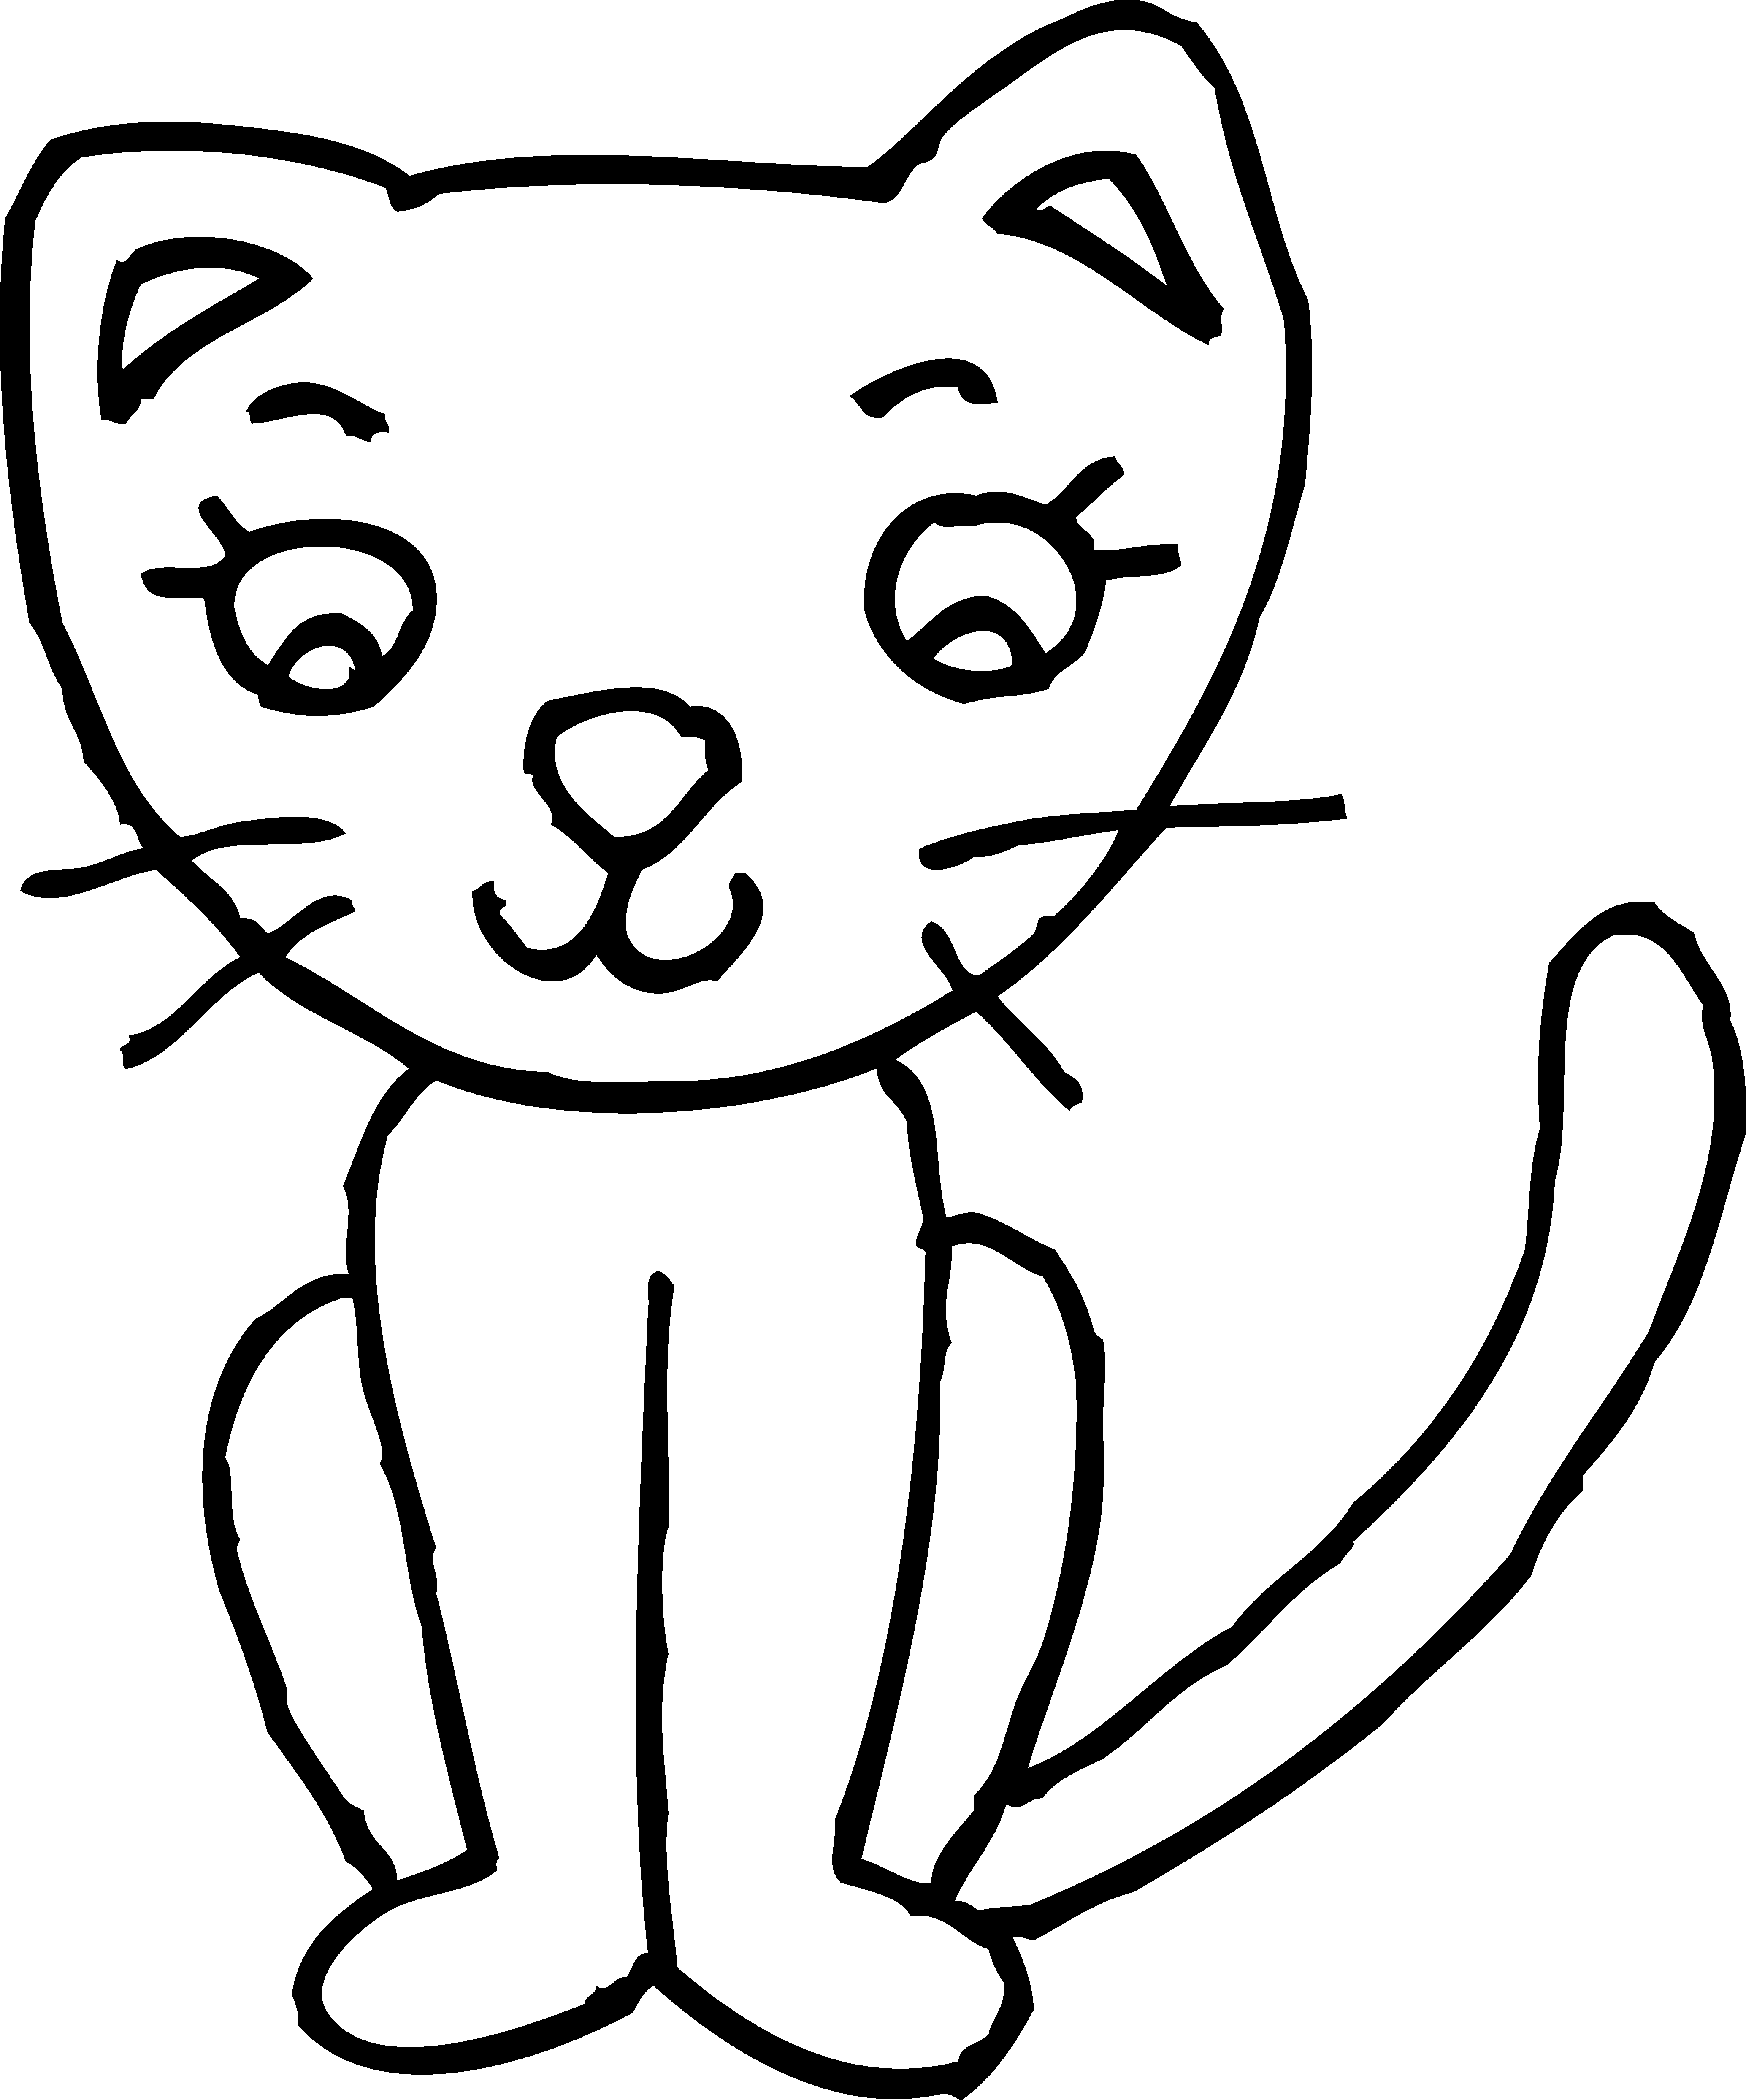 Cat Clip Art Black And White Clipart Panda Free Clipart Images